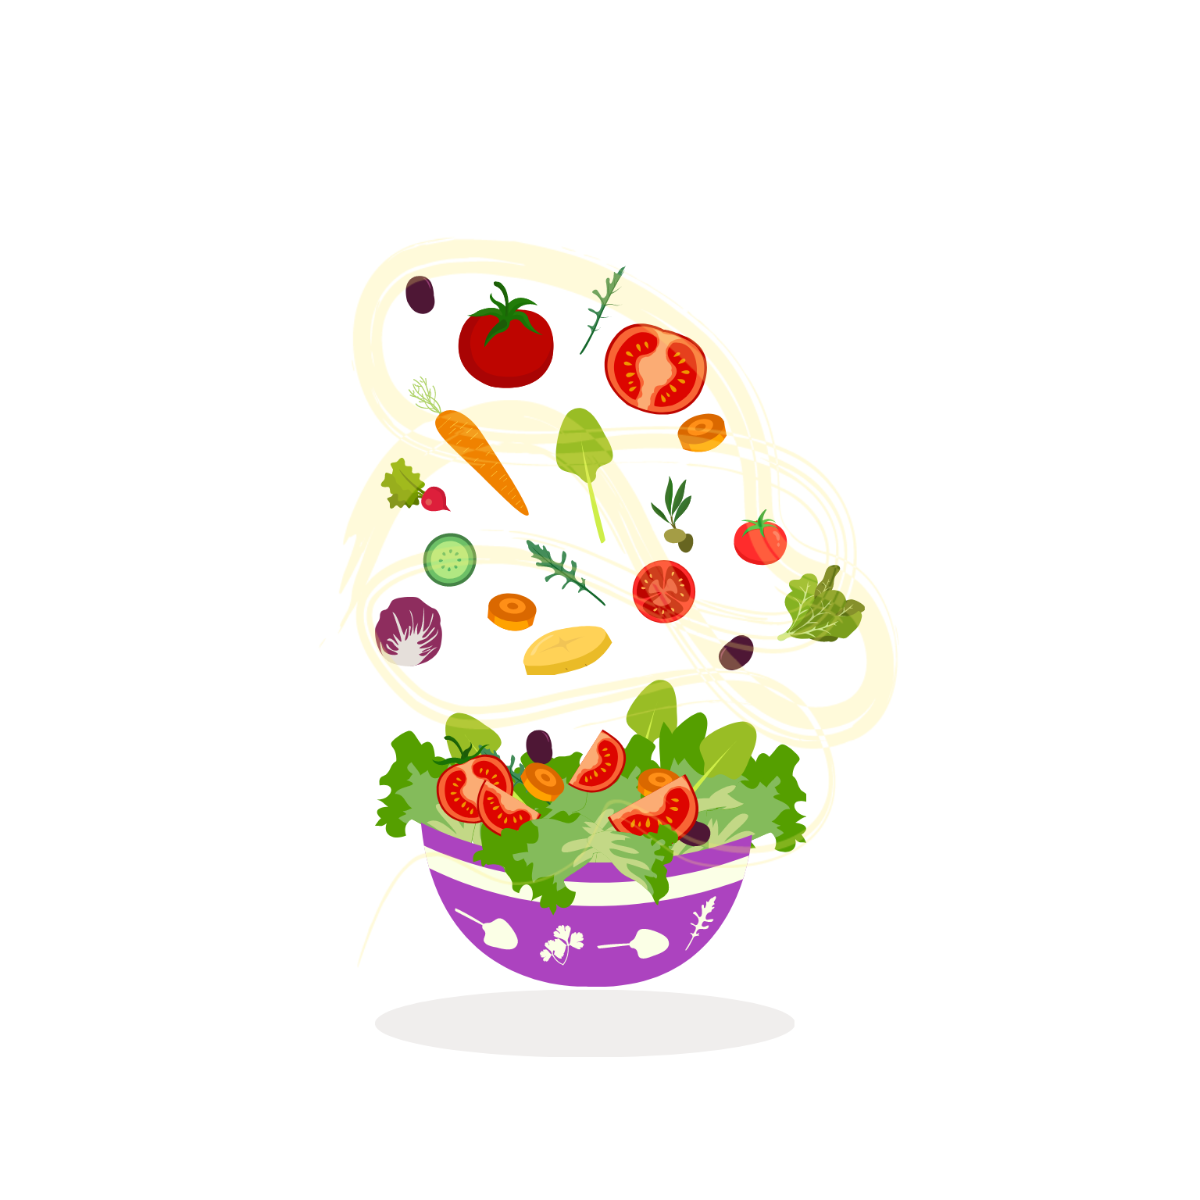 Free Salad Vector Template